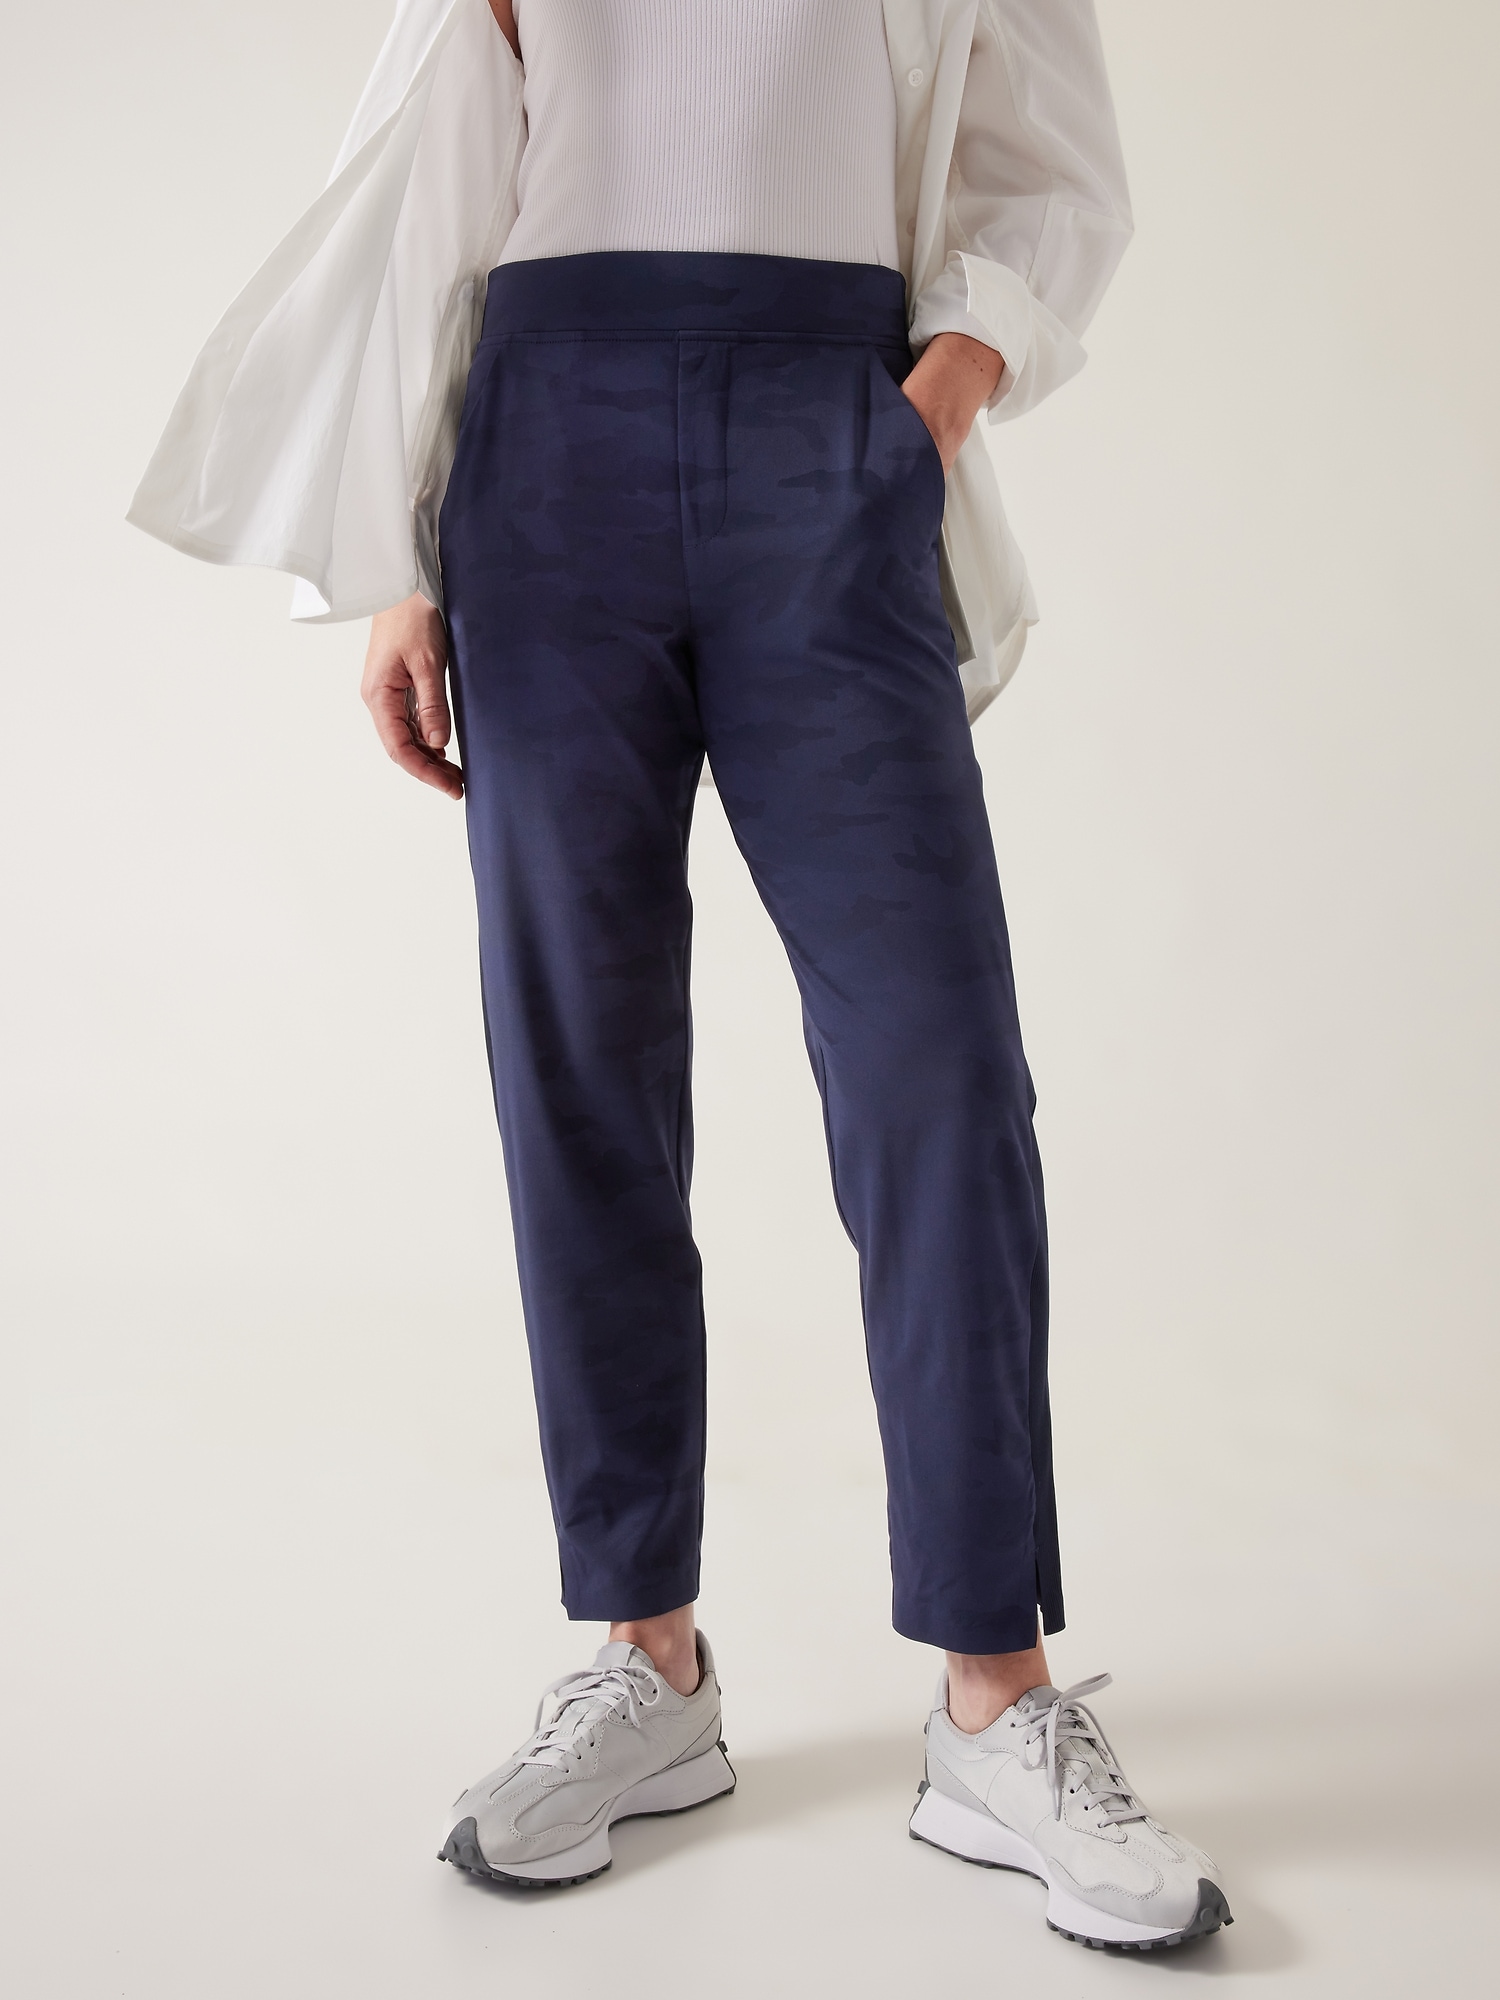 Athleta BROOKLYN ANKLE PANT - Trousers - navy/blue 